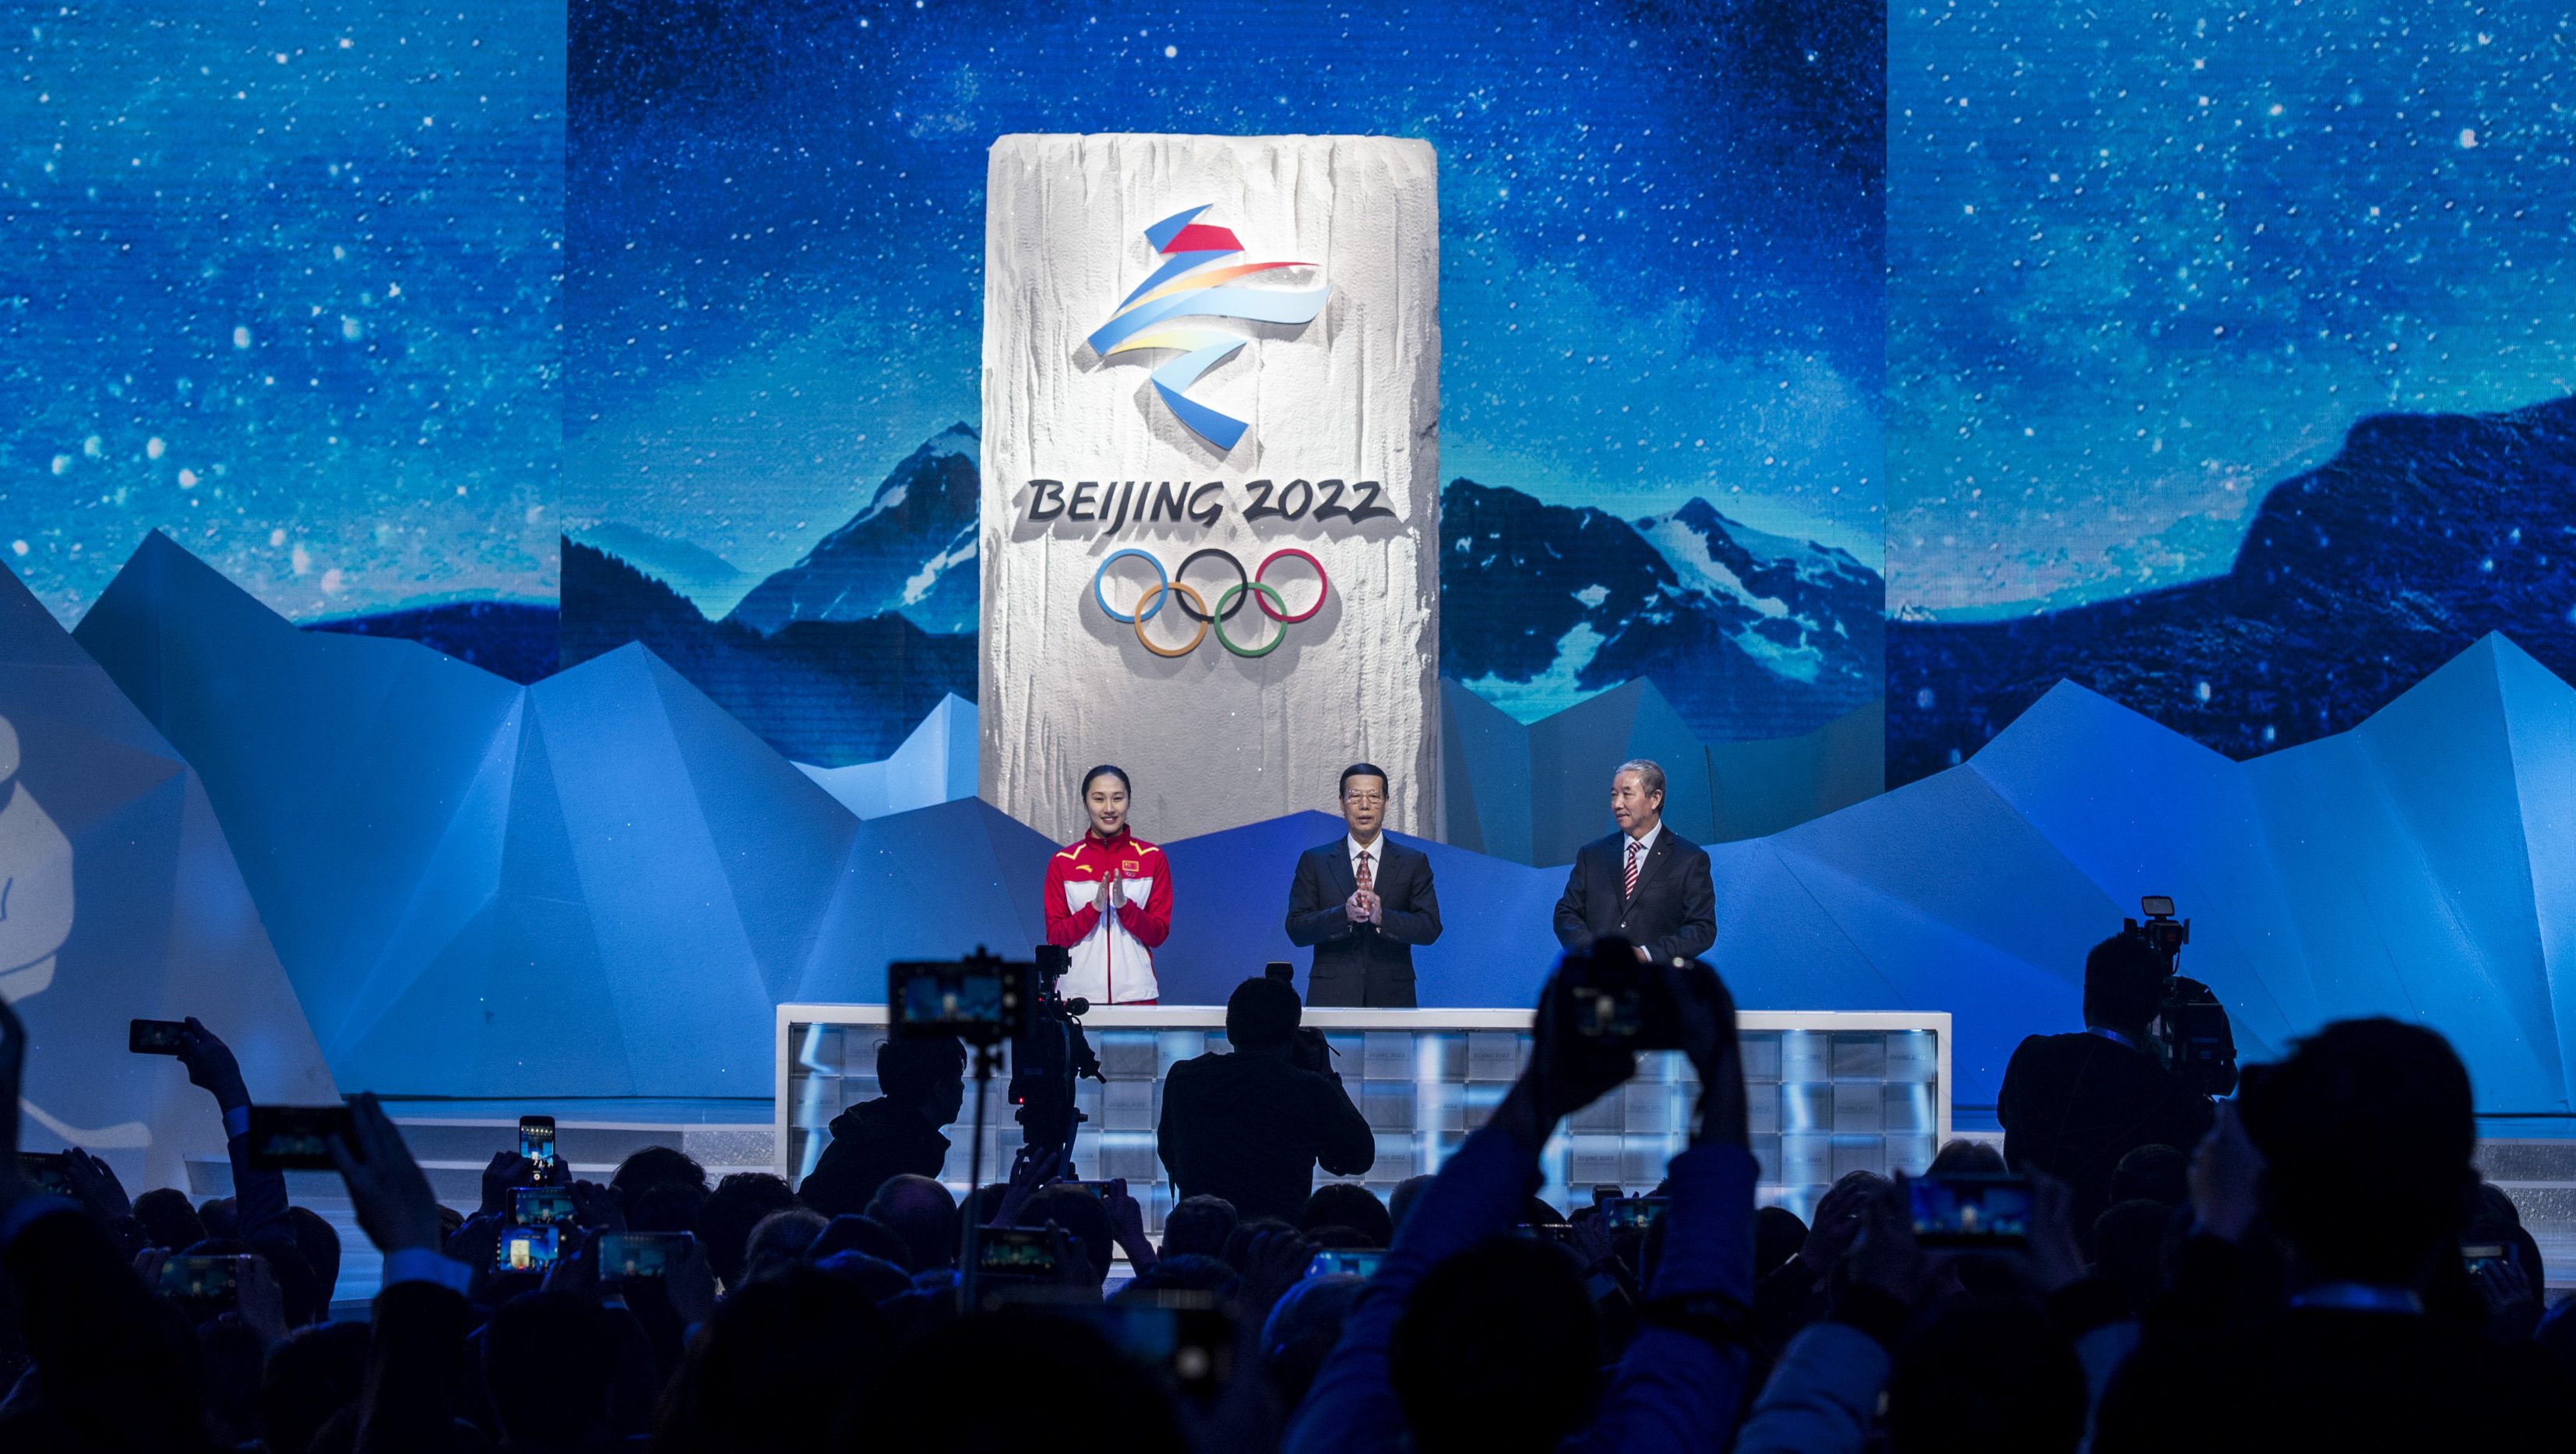 Winter Olympics 2022 5 Fast Facts You Need to Know